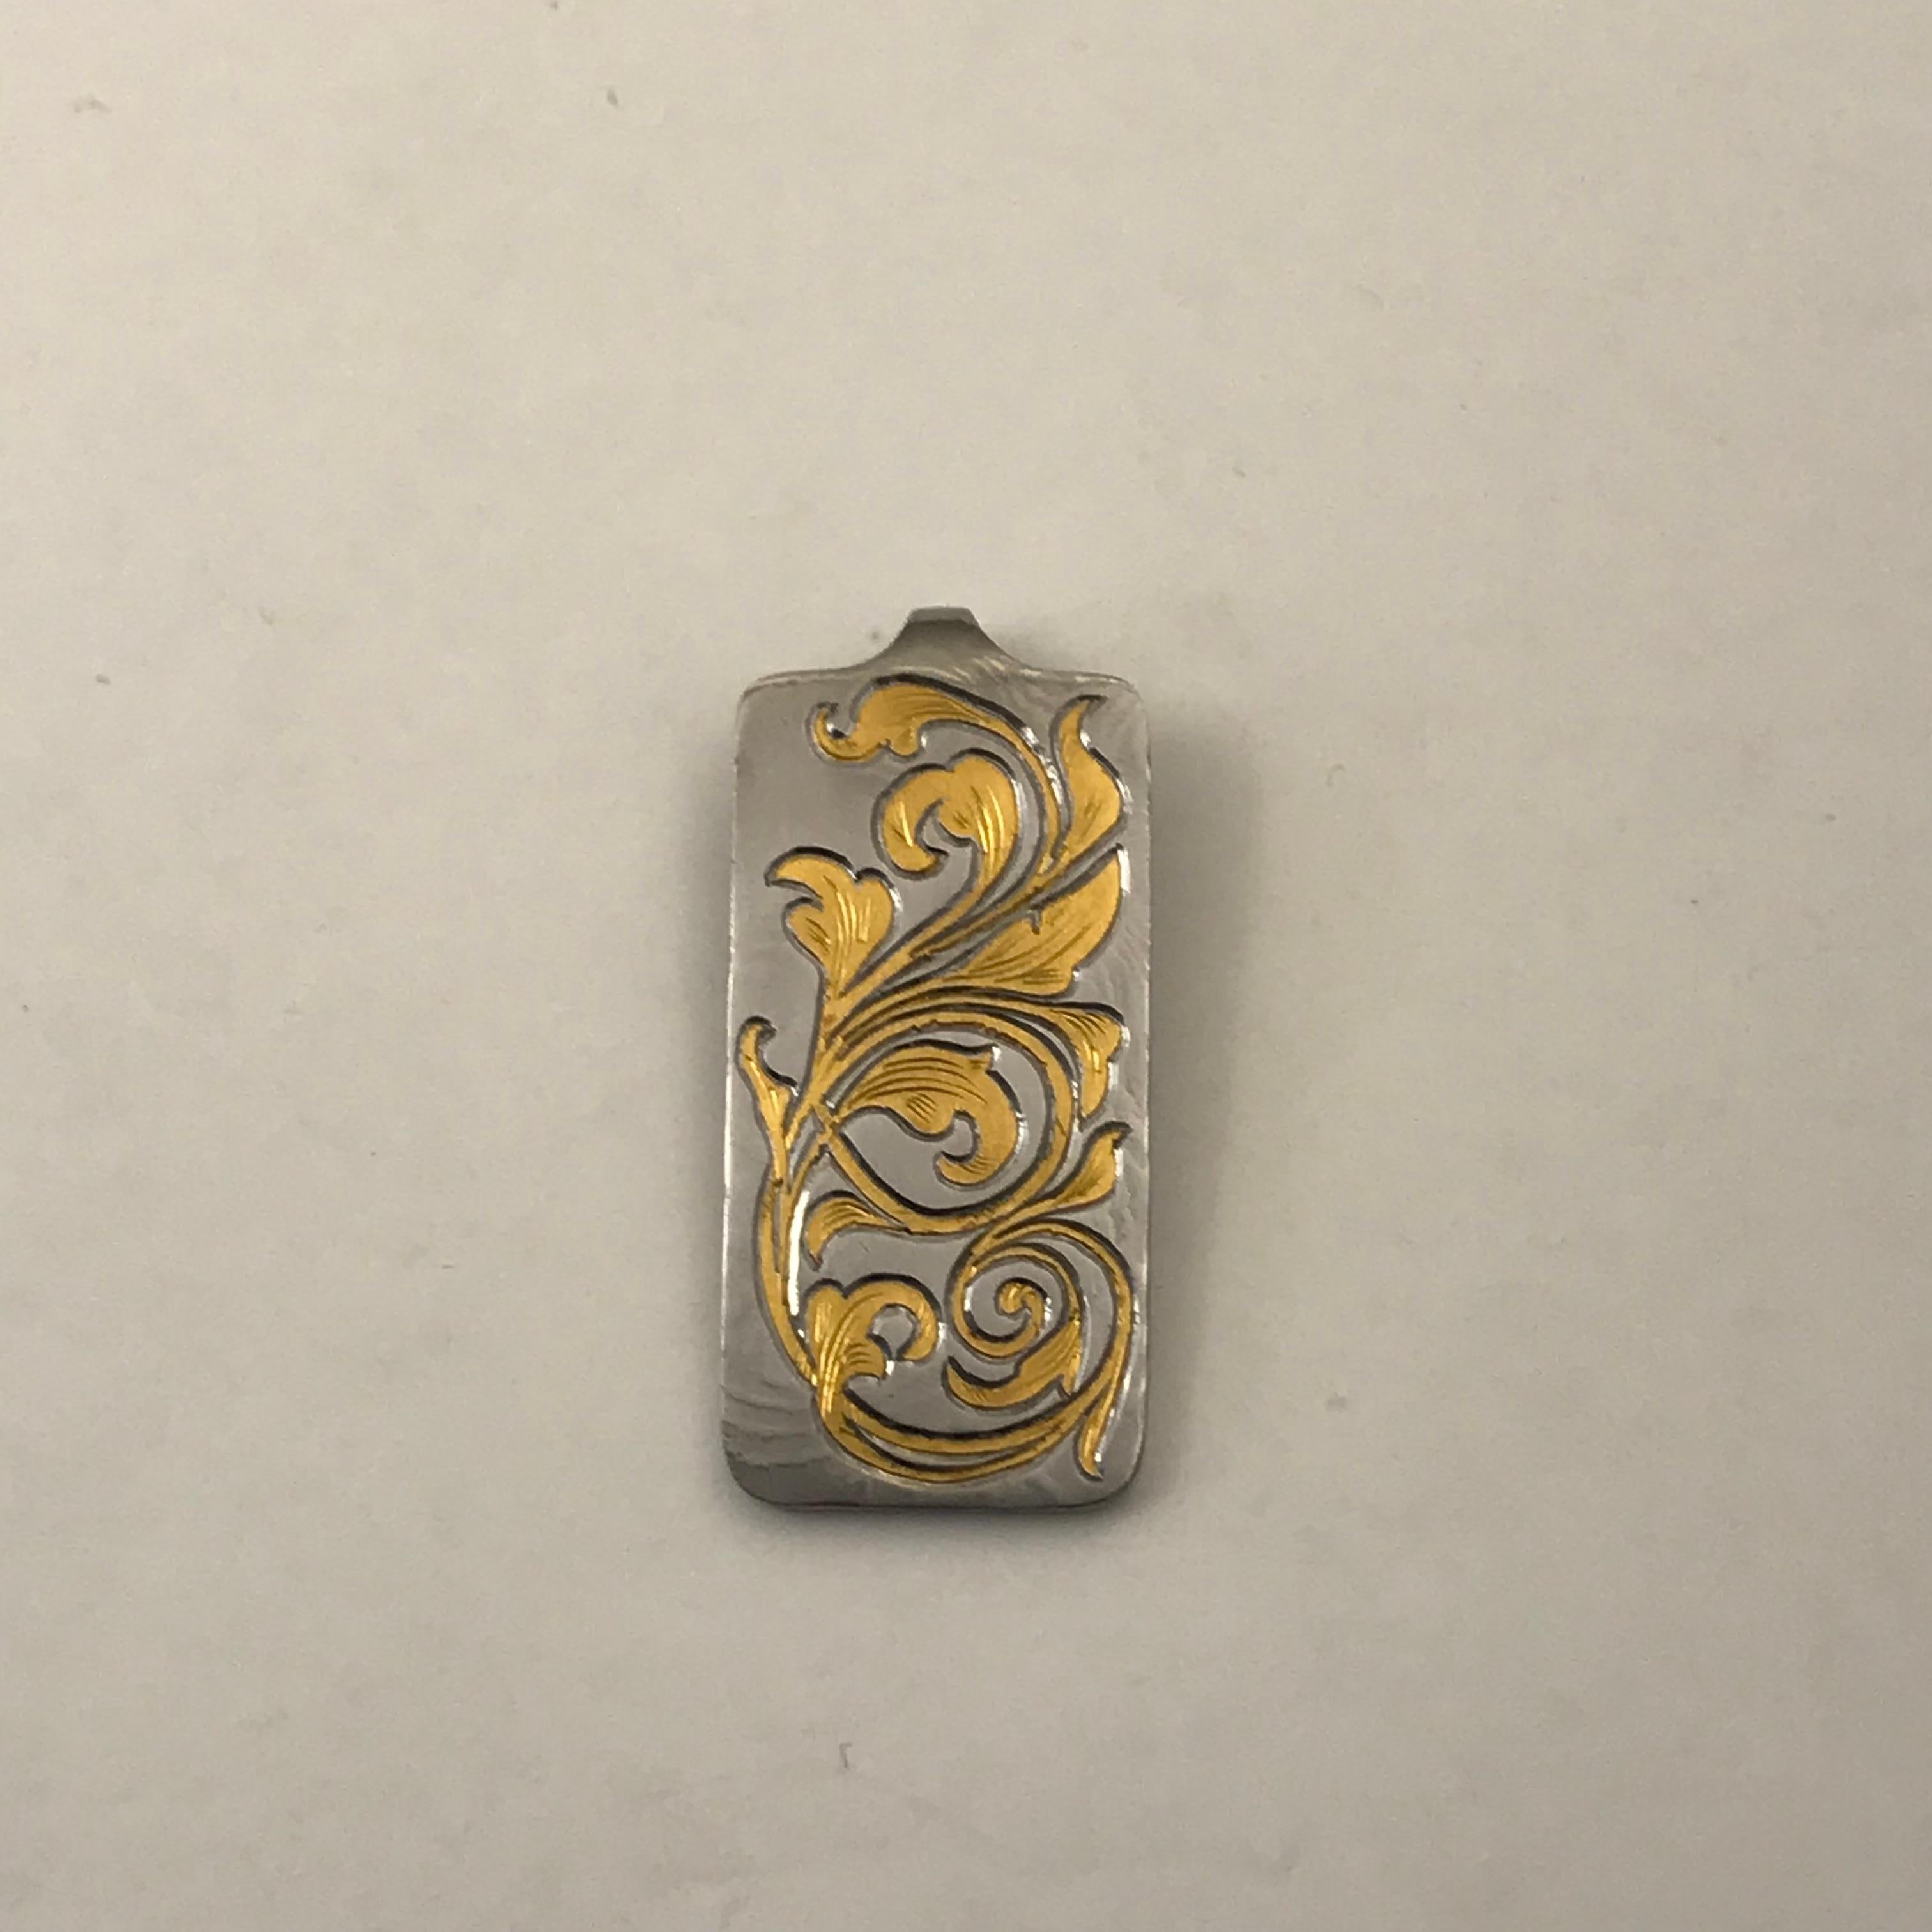 Damascus Steel & 24K Gold Pendant
This is a beautiful pendant made of Damascus Steel with 24 karat gold inlays. This is difficult to do because I have to cut out the pattern into the steel then hammer a sheet of 24k gold into the shape then engrave